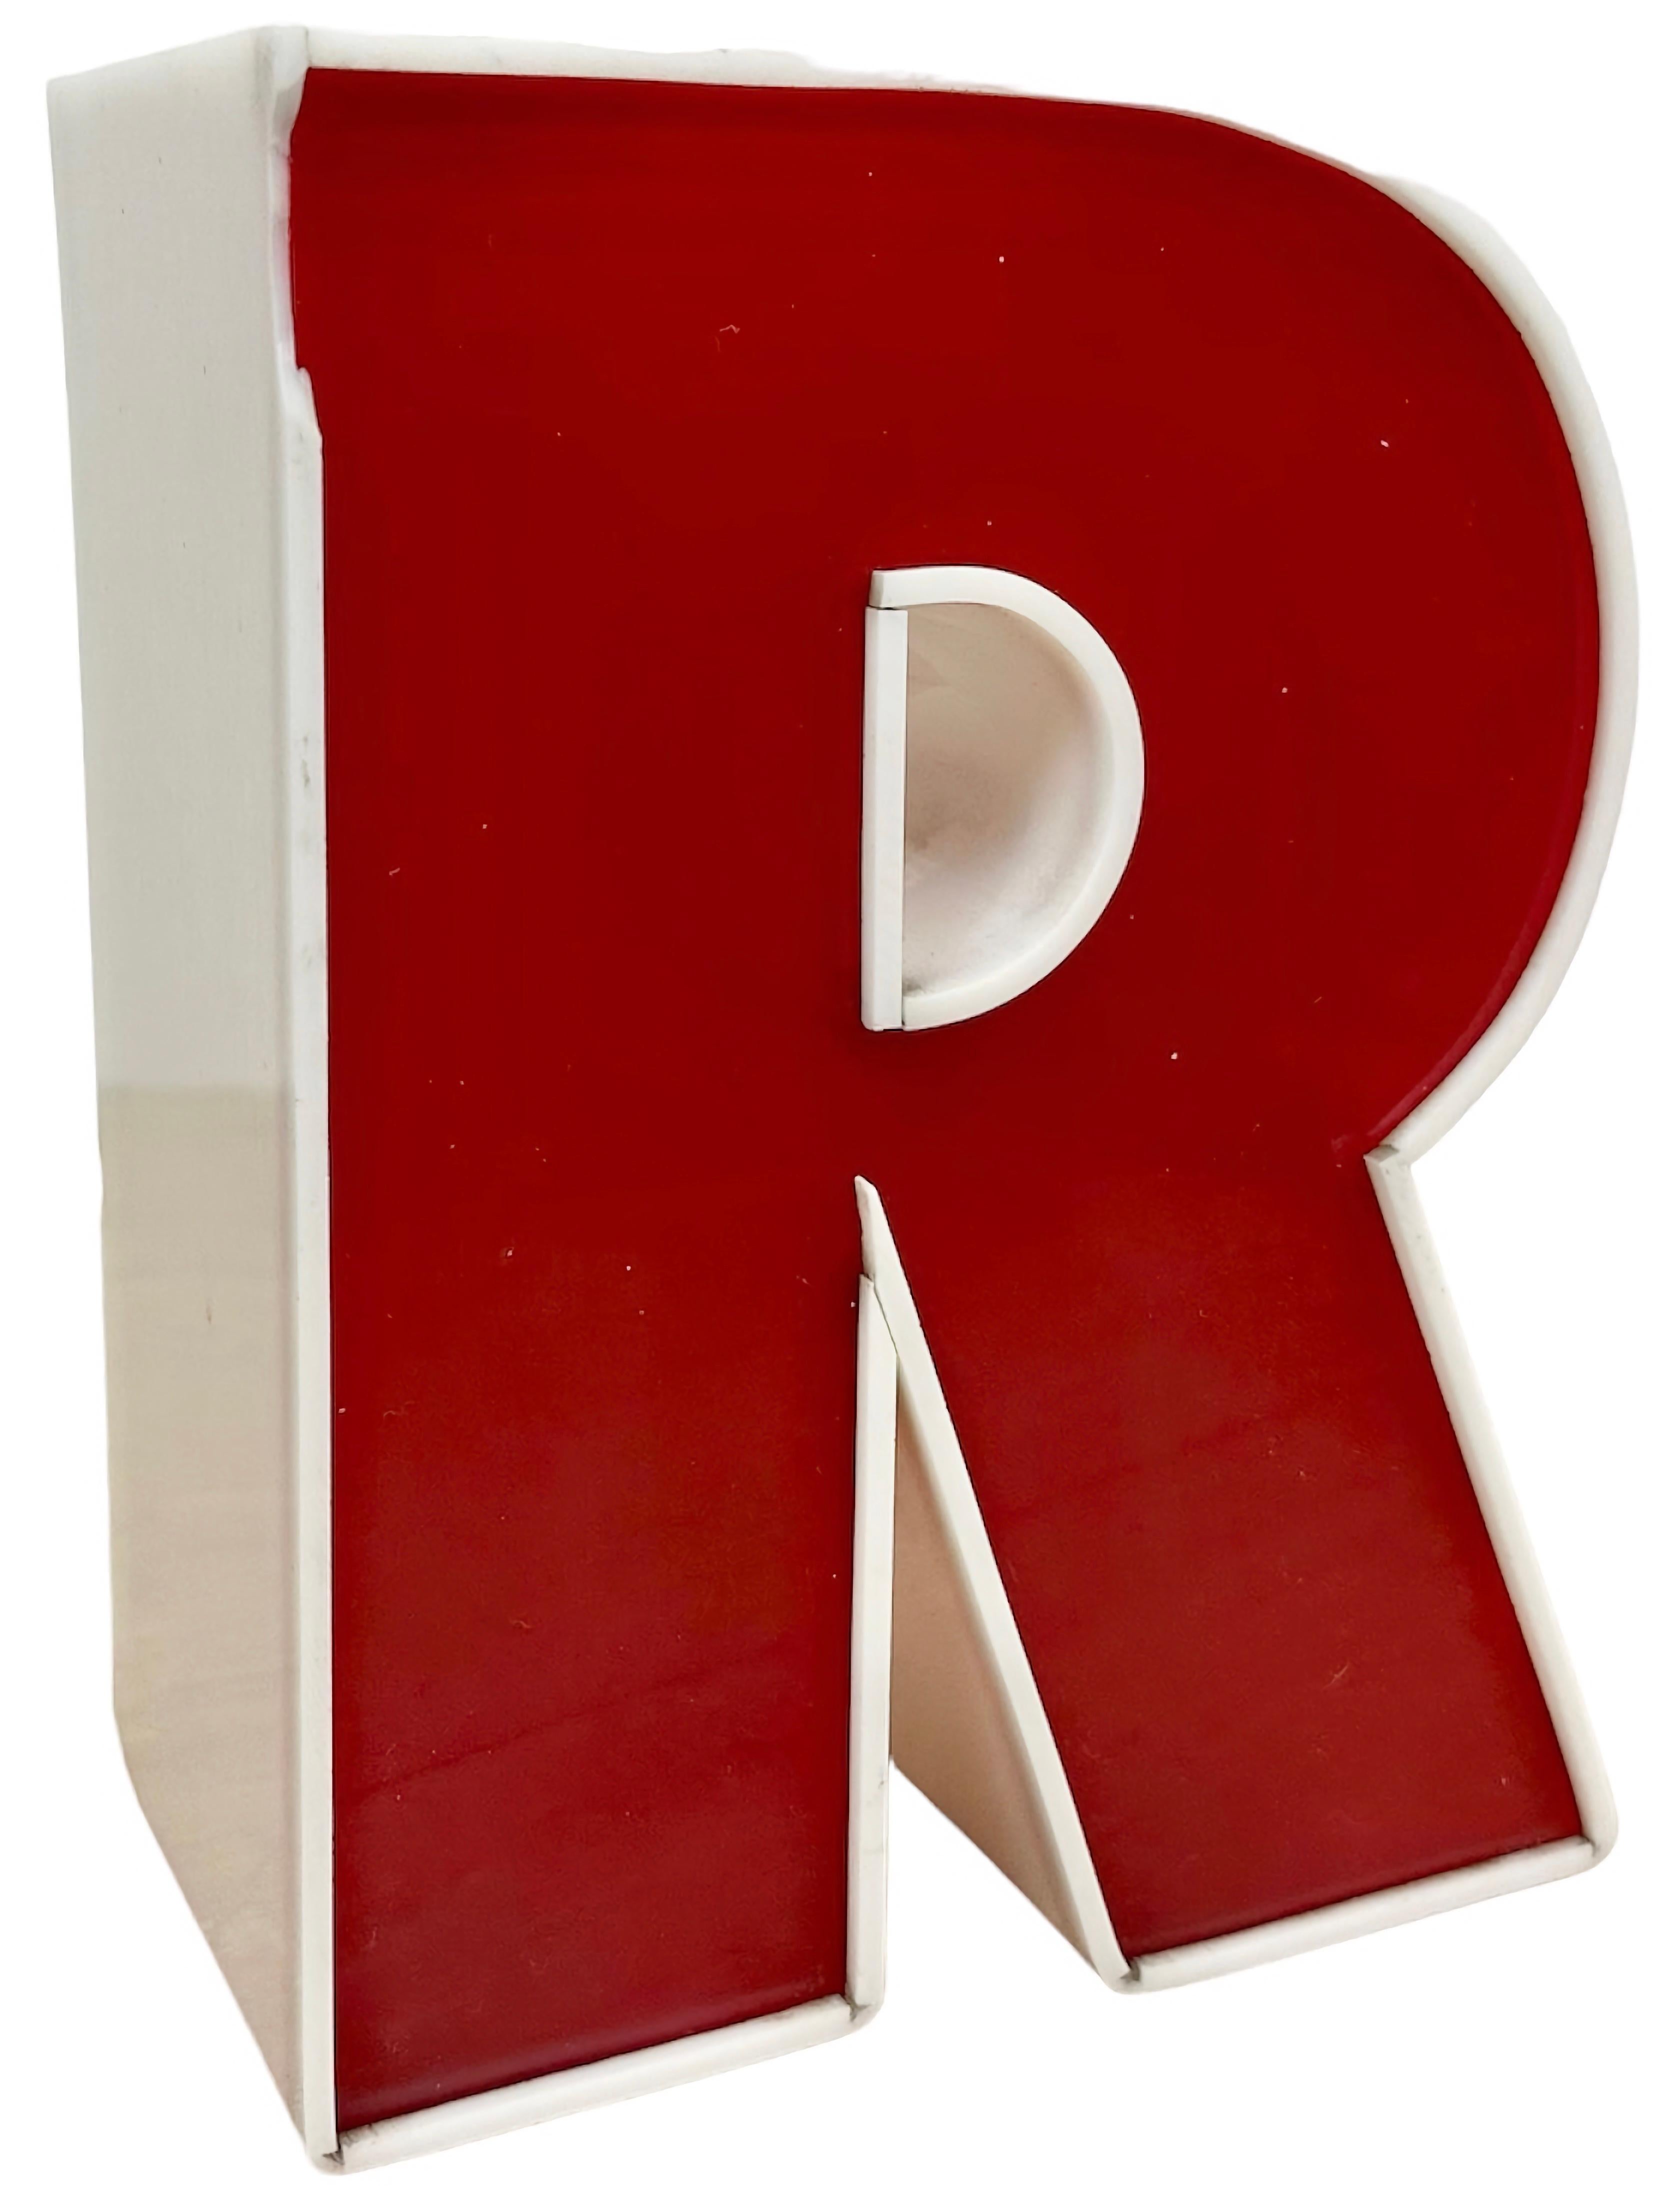 This vintage industrial plastic facade letter R was made in Italy during the 1970s and comes from an old advertising banner “ ROSTICCERIA”. The weight of the letter is 0.5 kg.